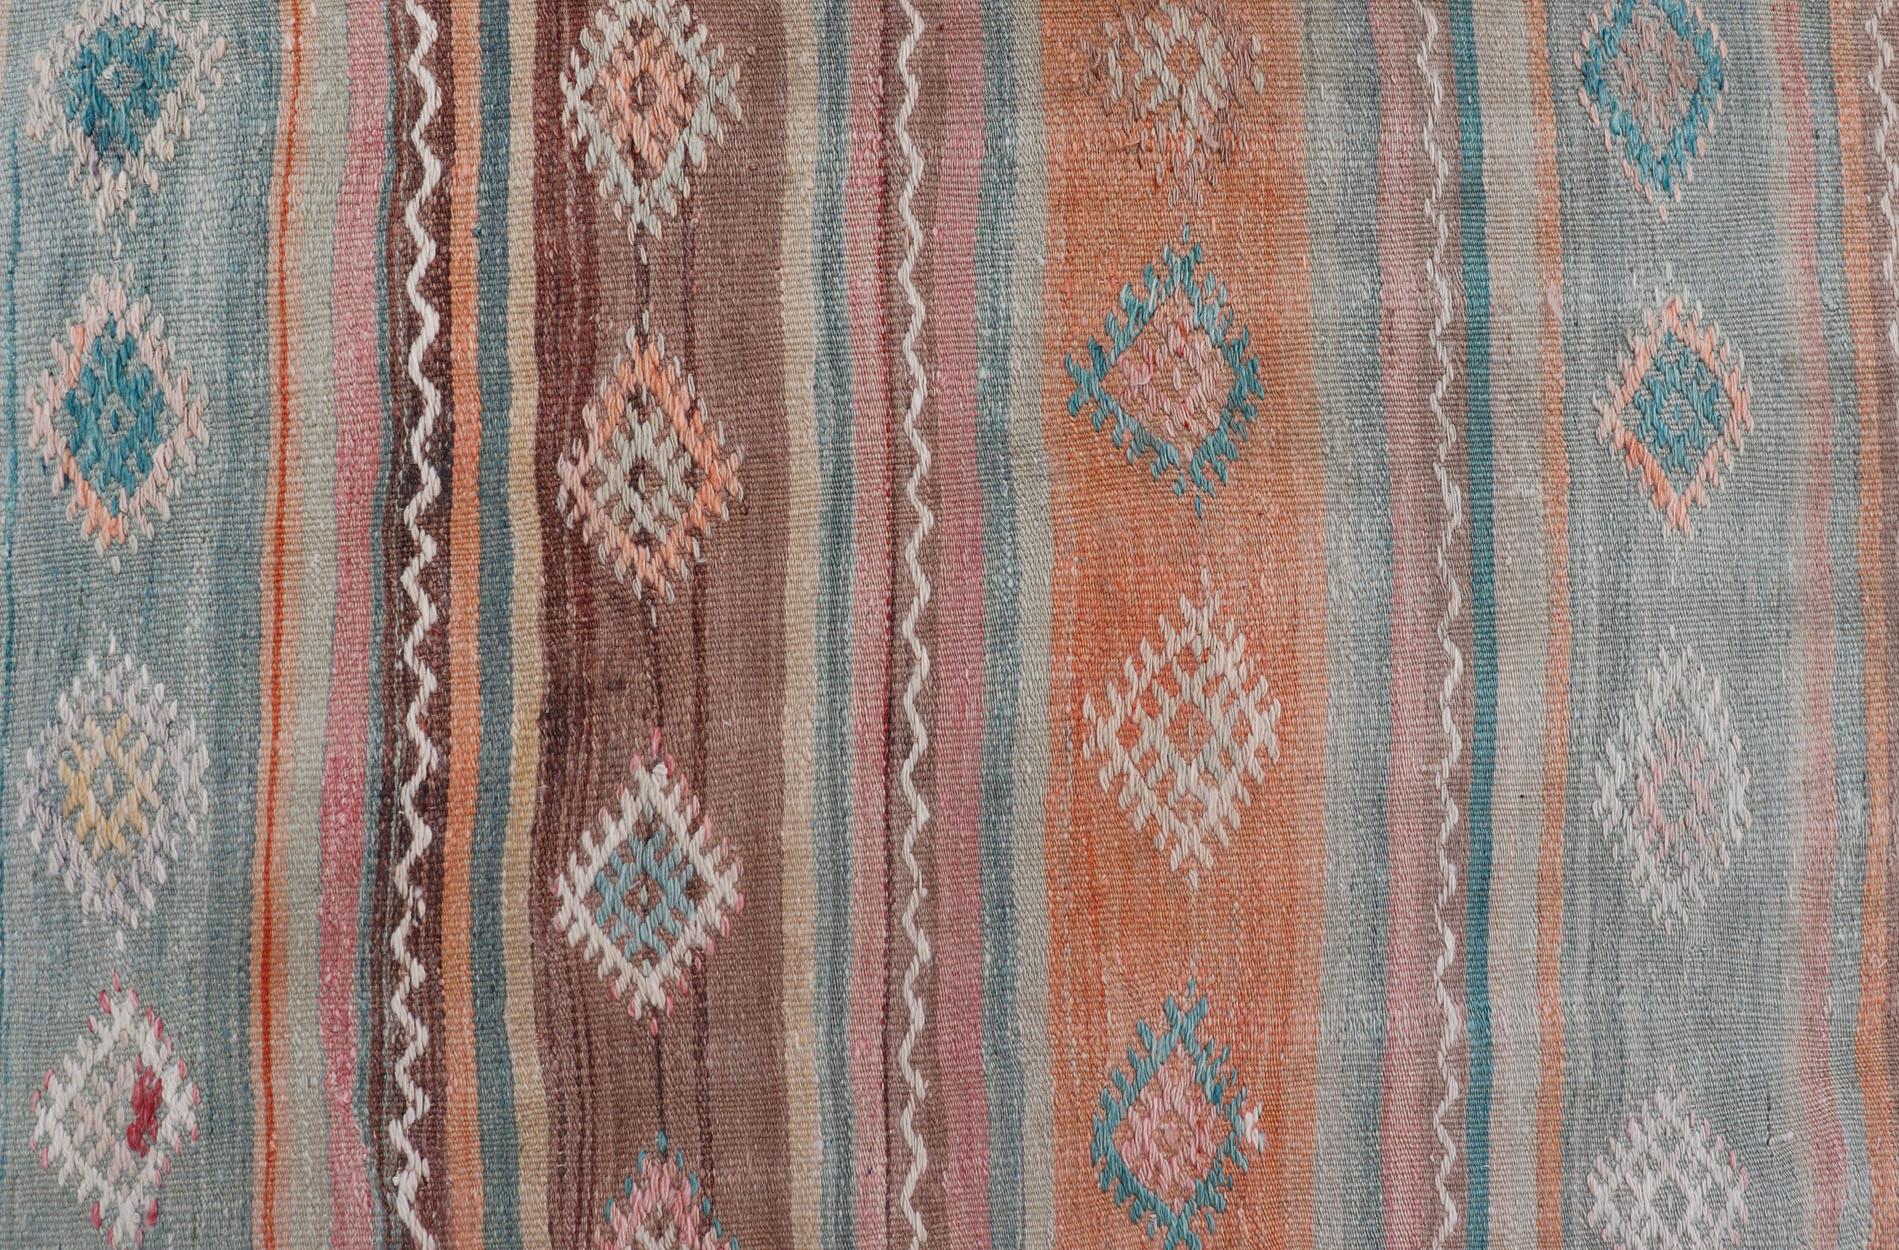 Hand-Woven Vintage Long Colorful Kilim Gallery Rug with Stripe Design in Soft Colors For Sale